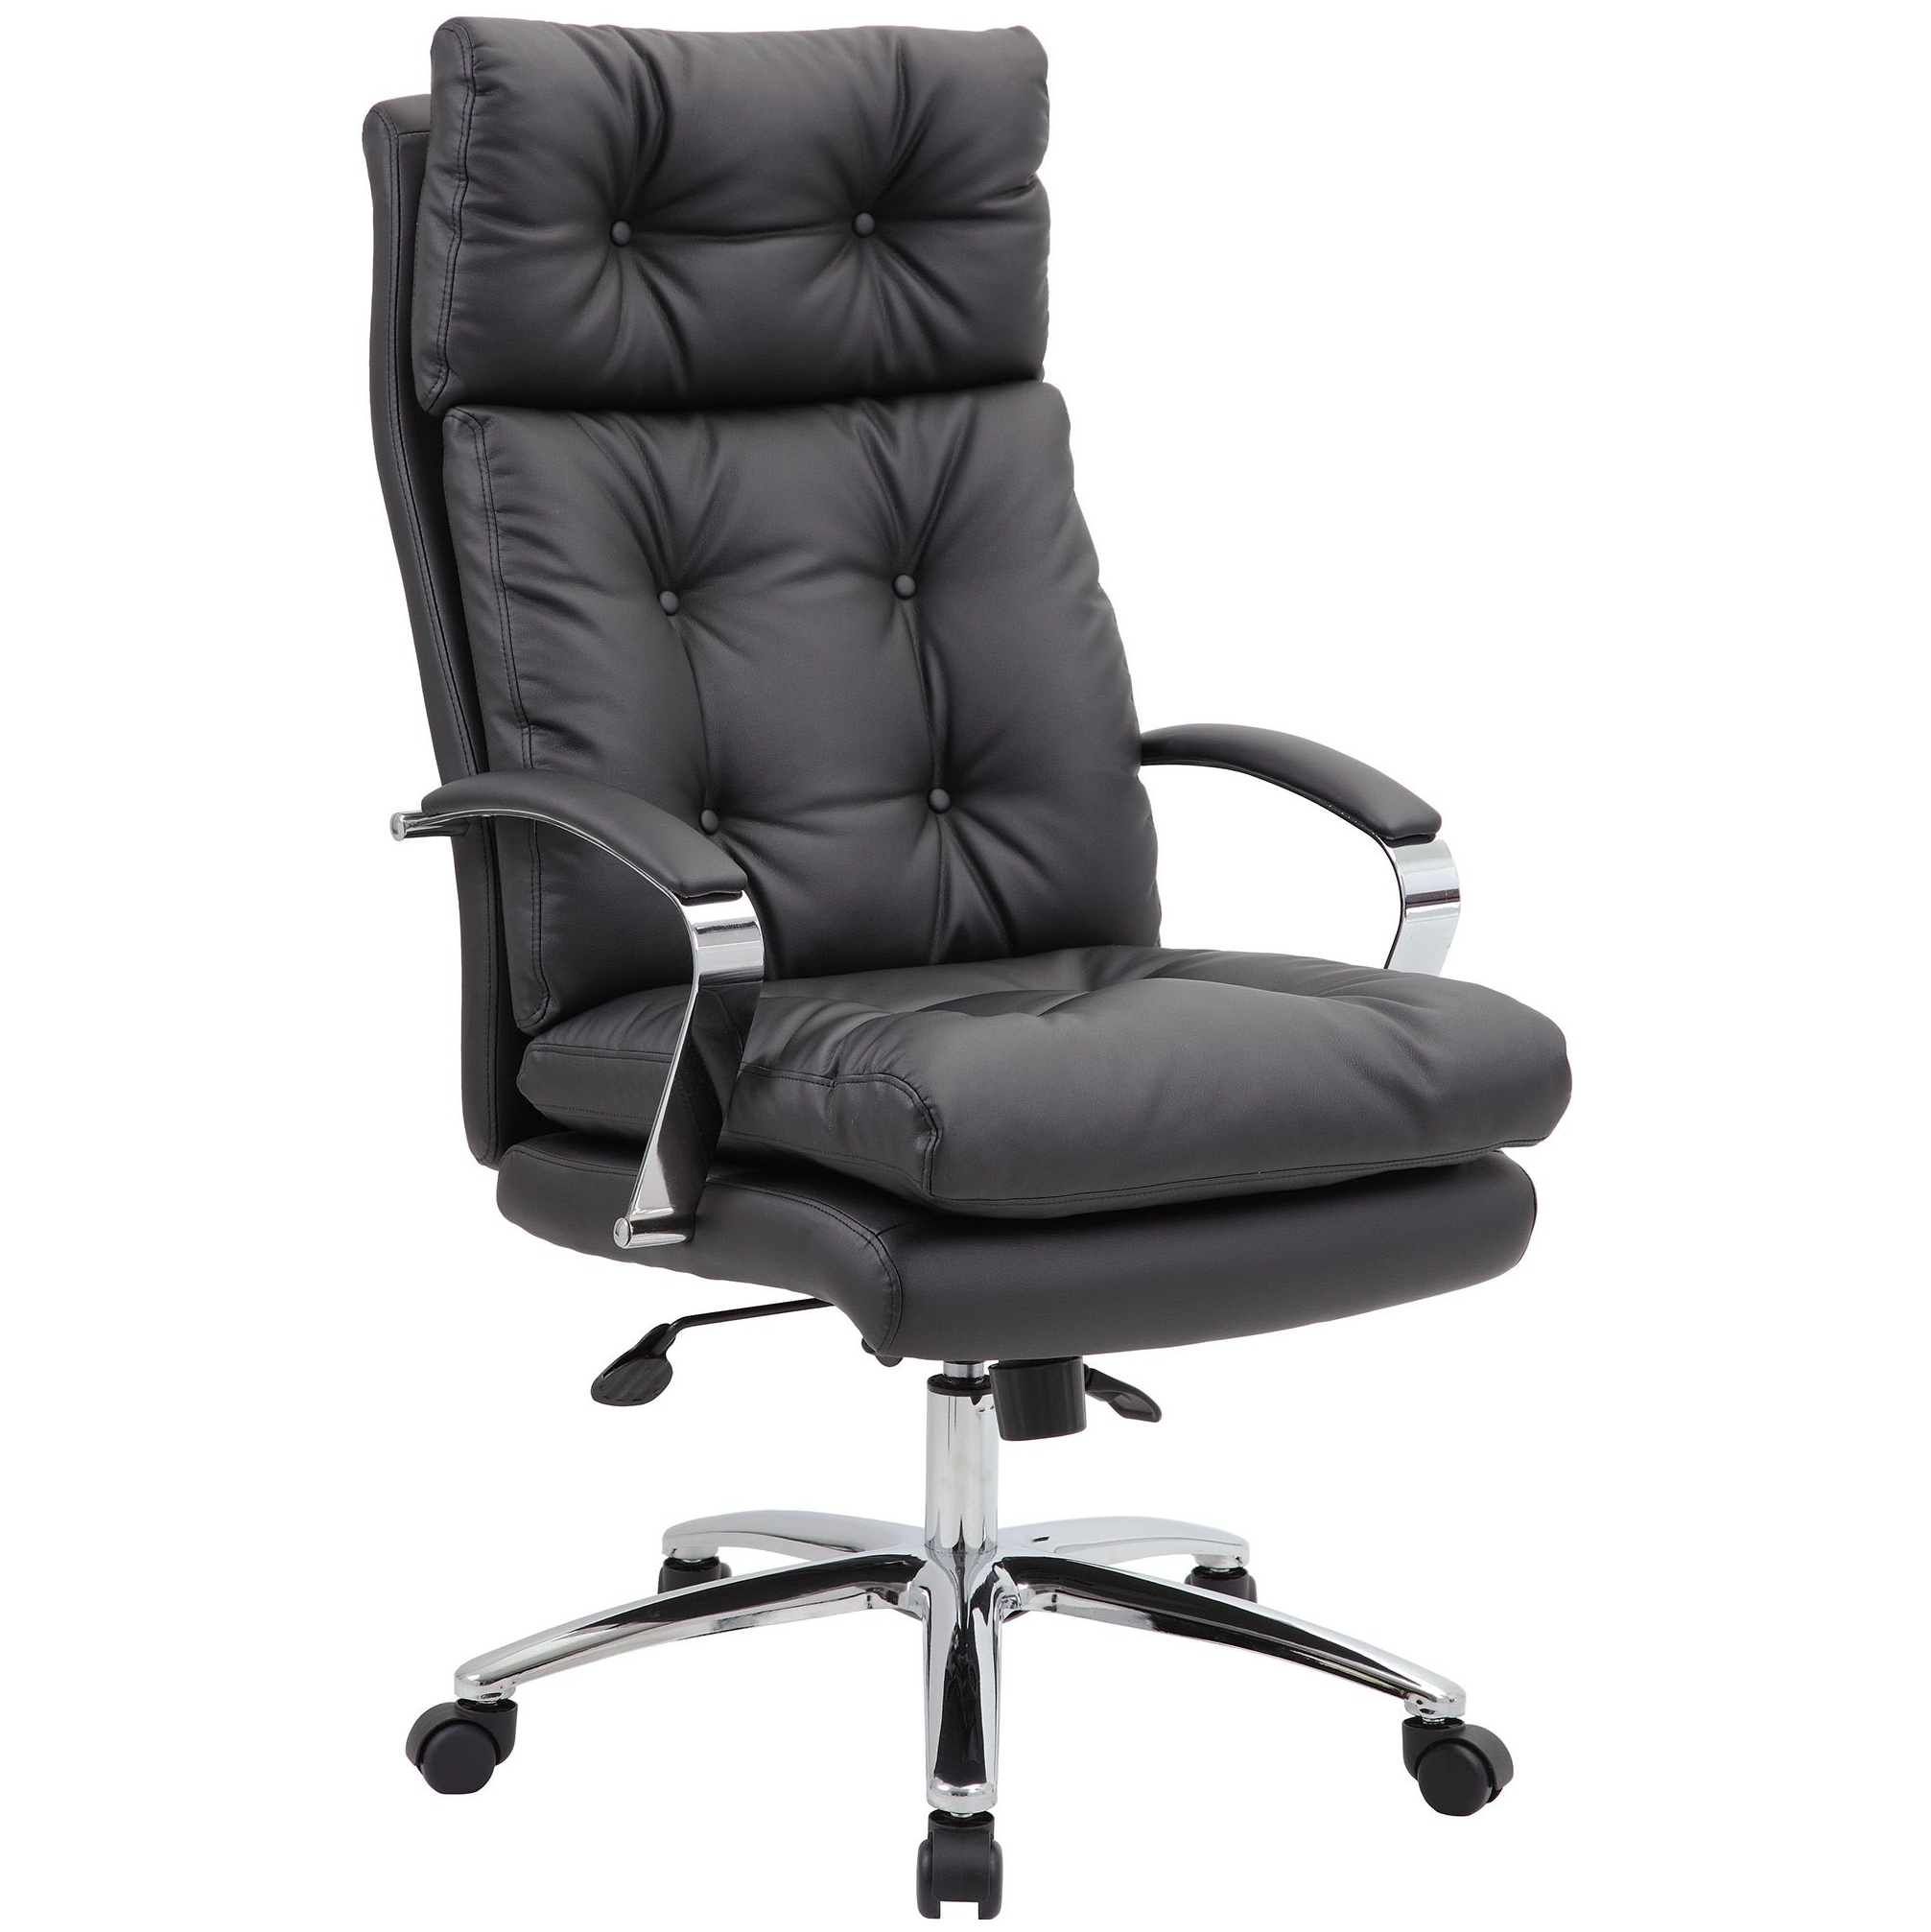 Venus Faux Leather Executive Office, Grey Leather Executive Office Chair